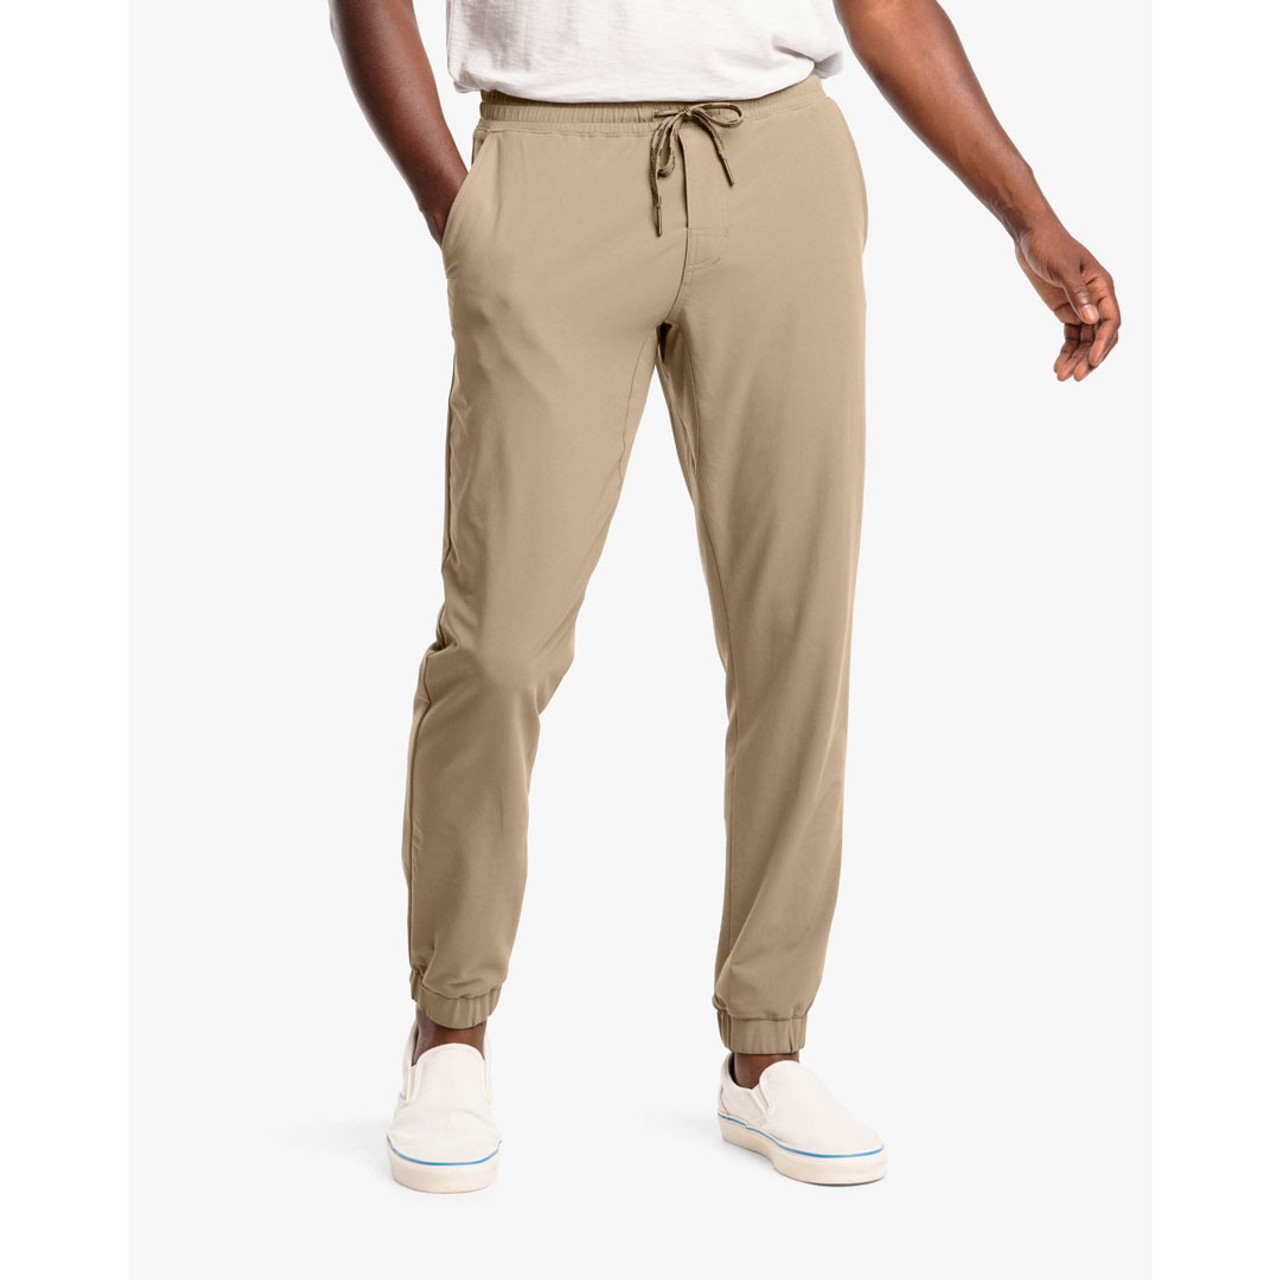 https://cdn11.bigcommerce.com/s-ppsyskcavg/images/stencil/1280x1280/products/60365/211329/the-excursion-performance-jogger-heather-sandstone-khaki-front-9371_1820x__78332.1693329150.jpg?c=2?imbypass=on